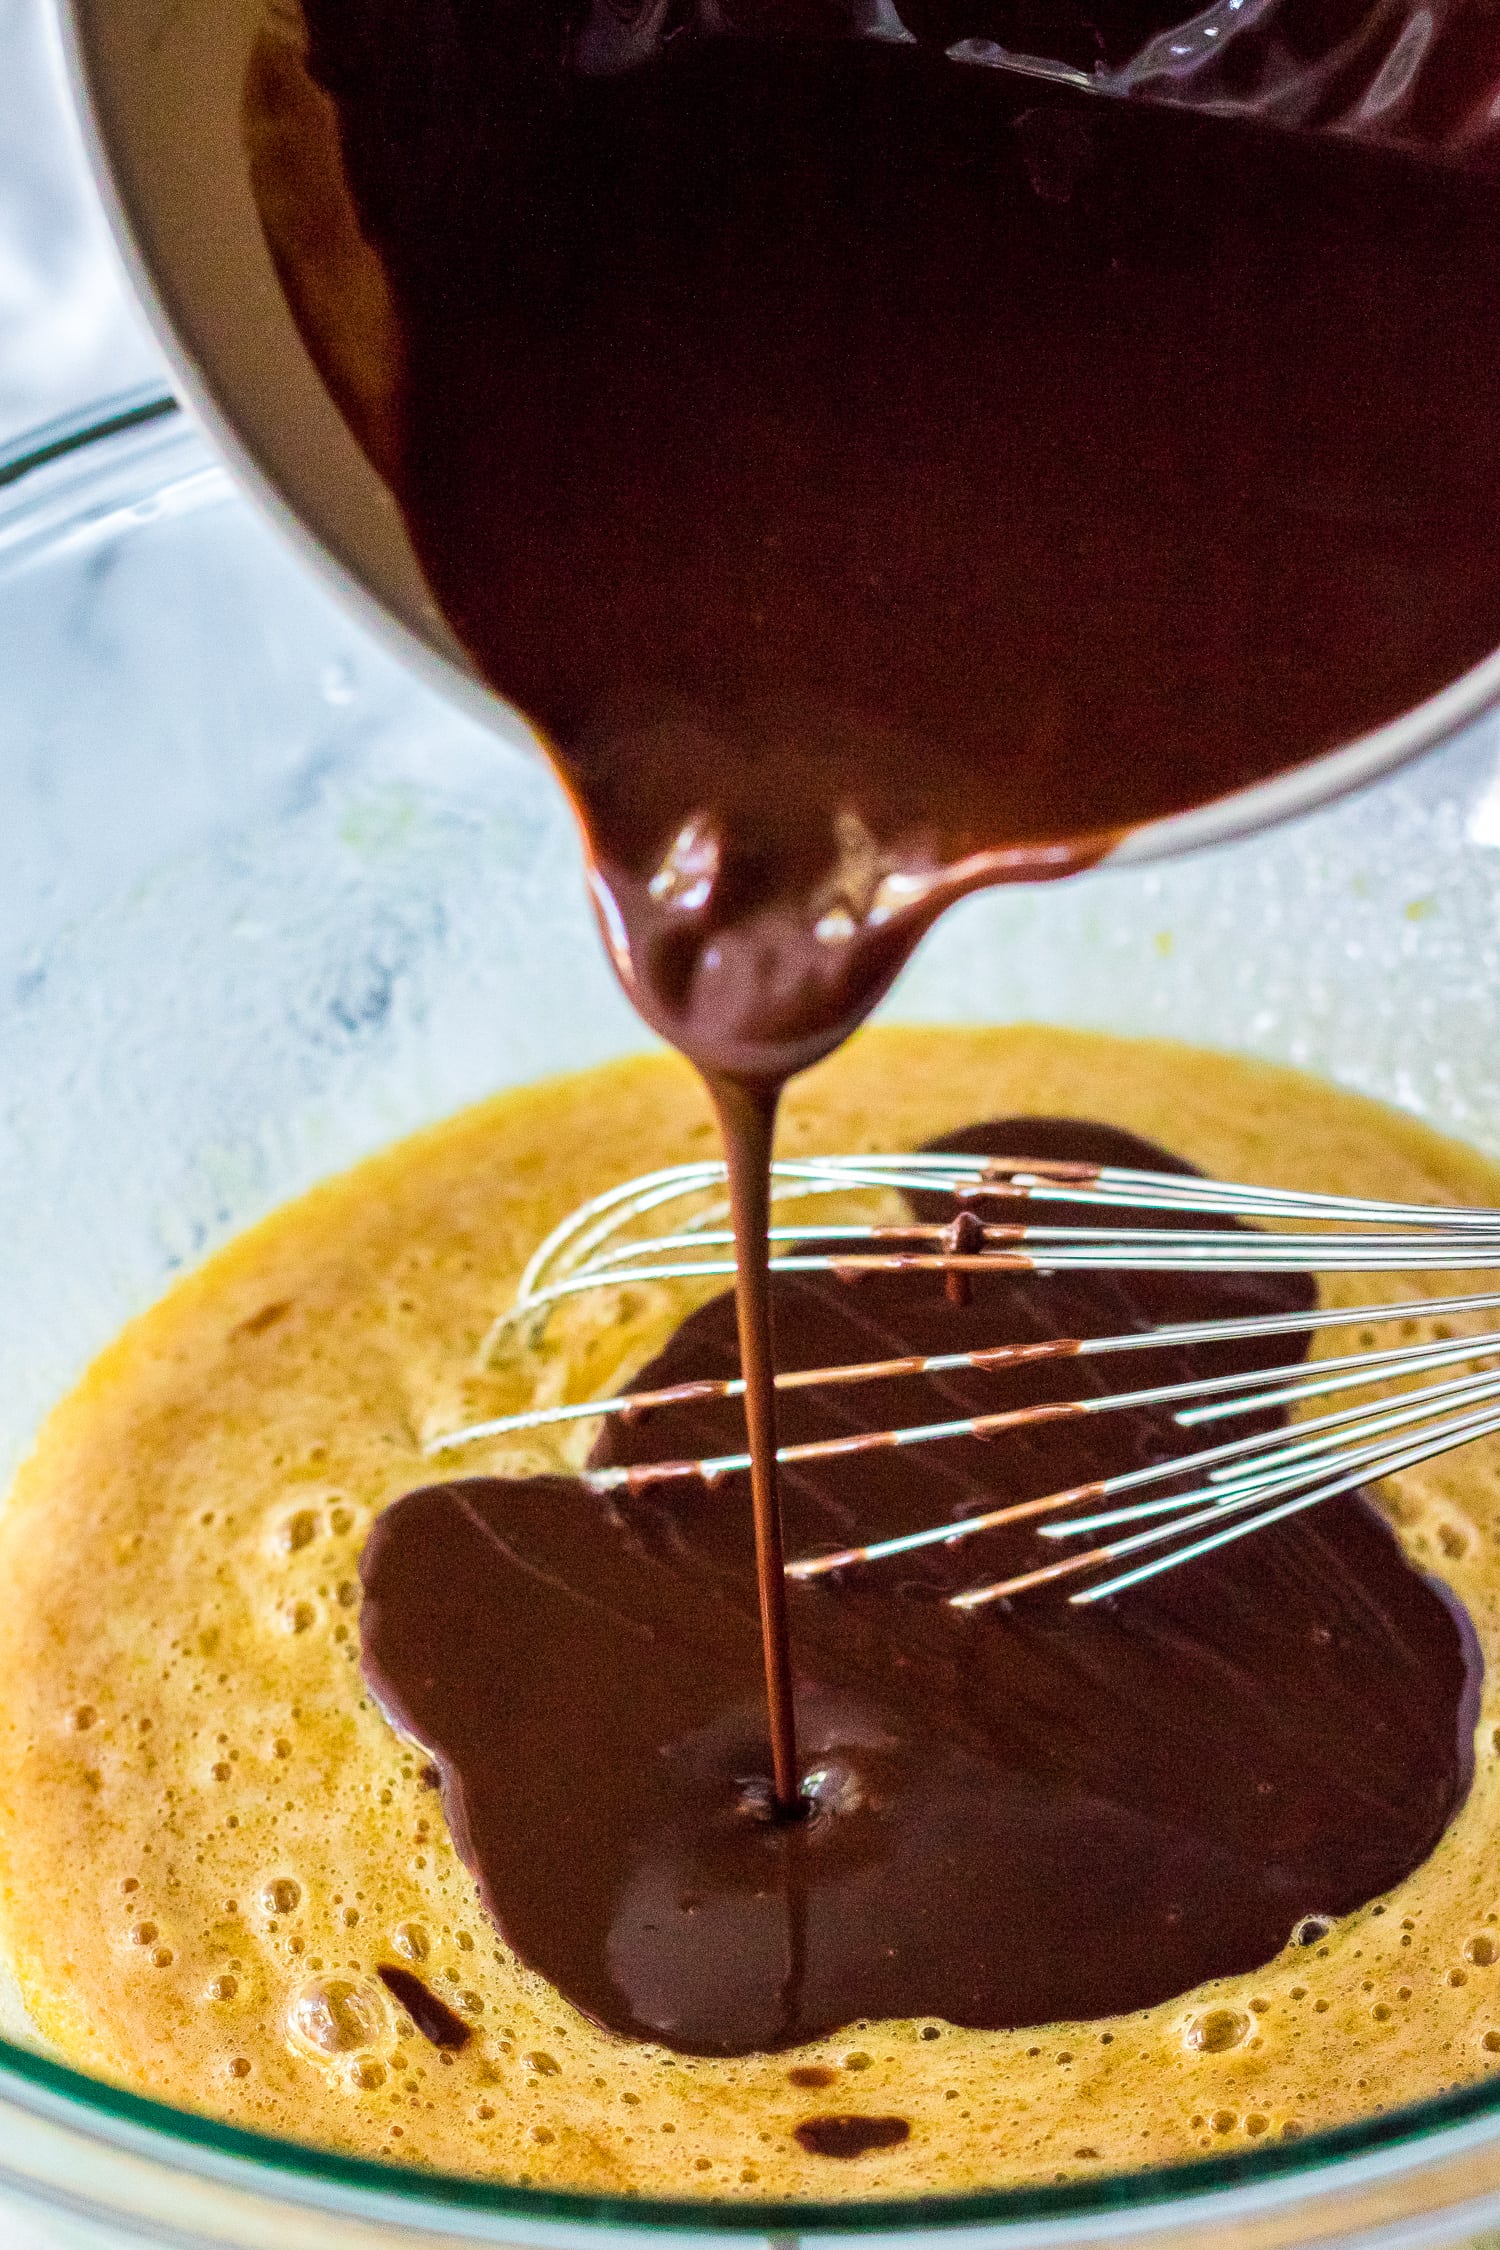 Pouring melted chocolate into brownie batter